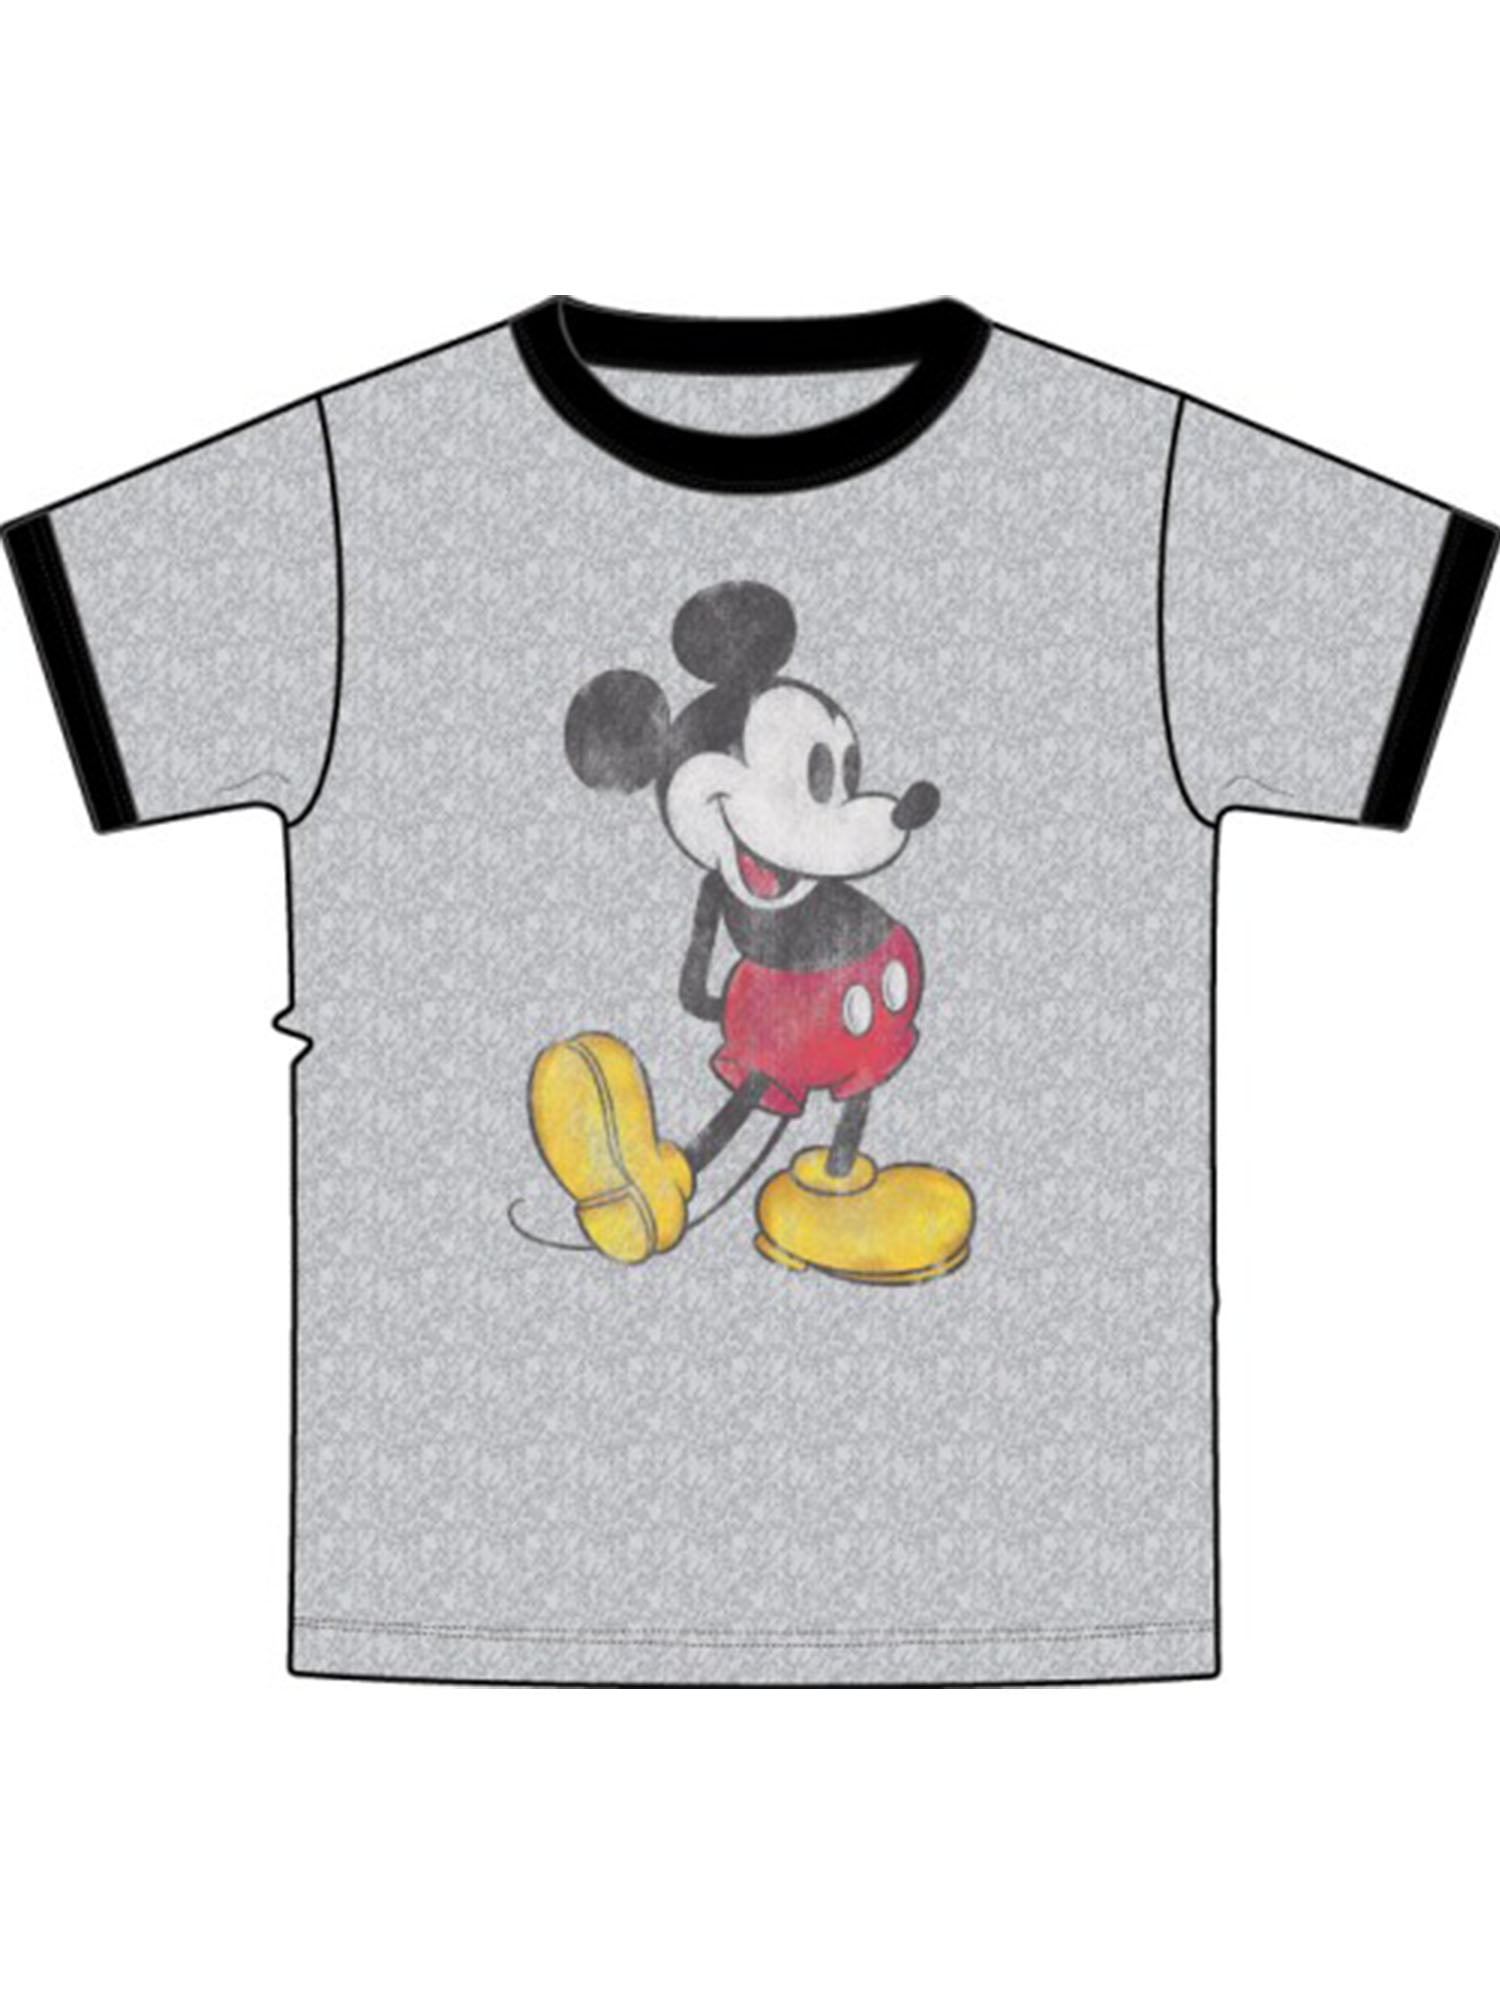 Disney Store Mickey Mouse Space Ringer T Shirt Tee Blue Shirt Size 2/3 4 5/6 